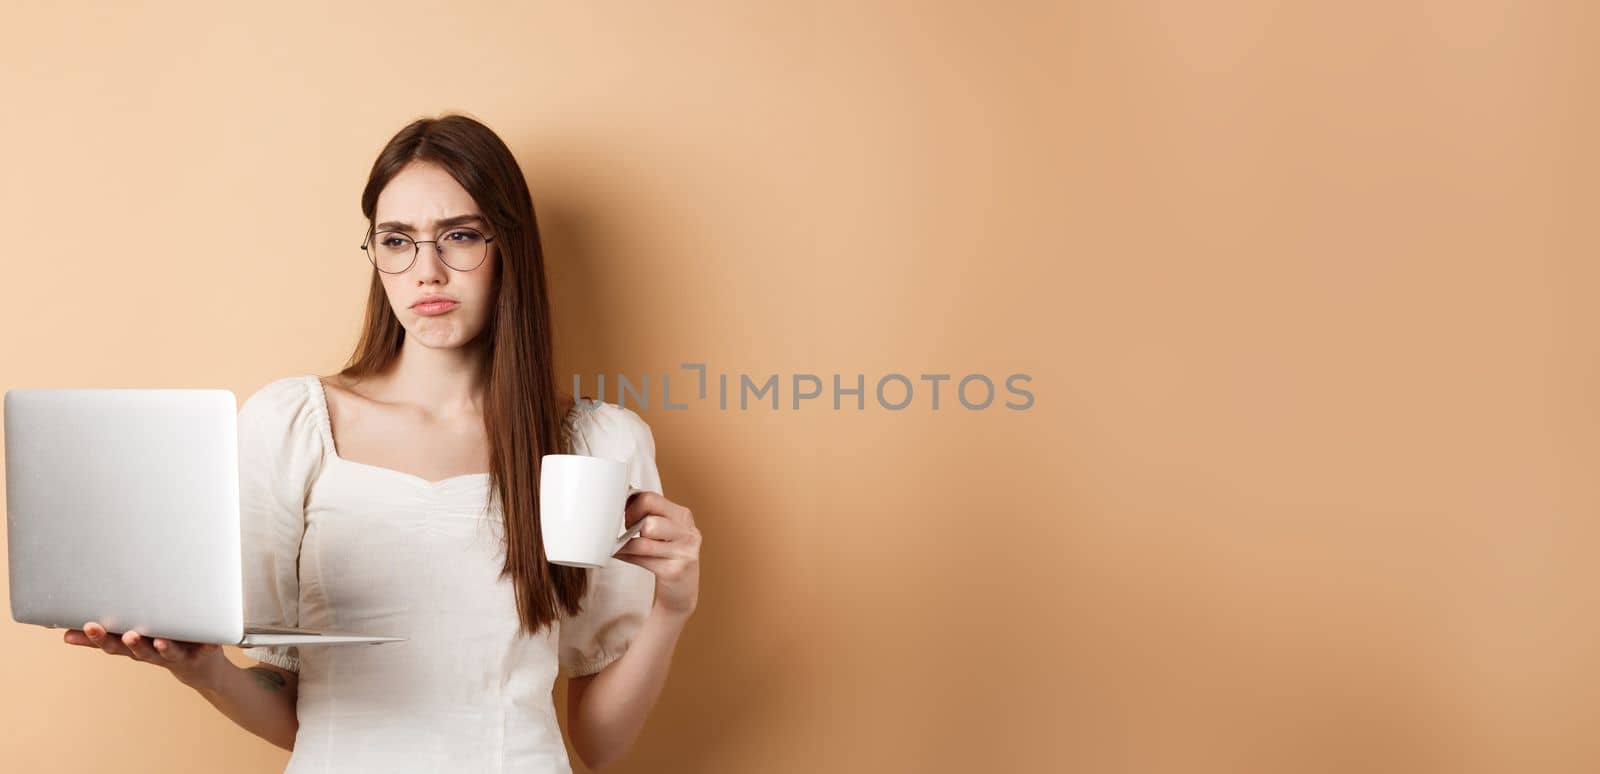 Tired working girl looking at laptop bored, drinking coffee while using computer for work, standing on beige background.